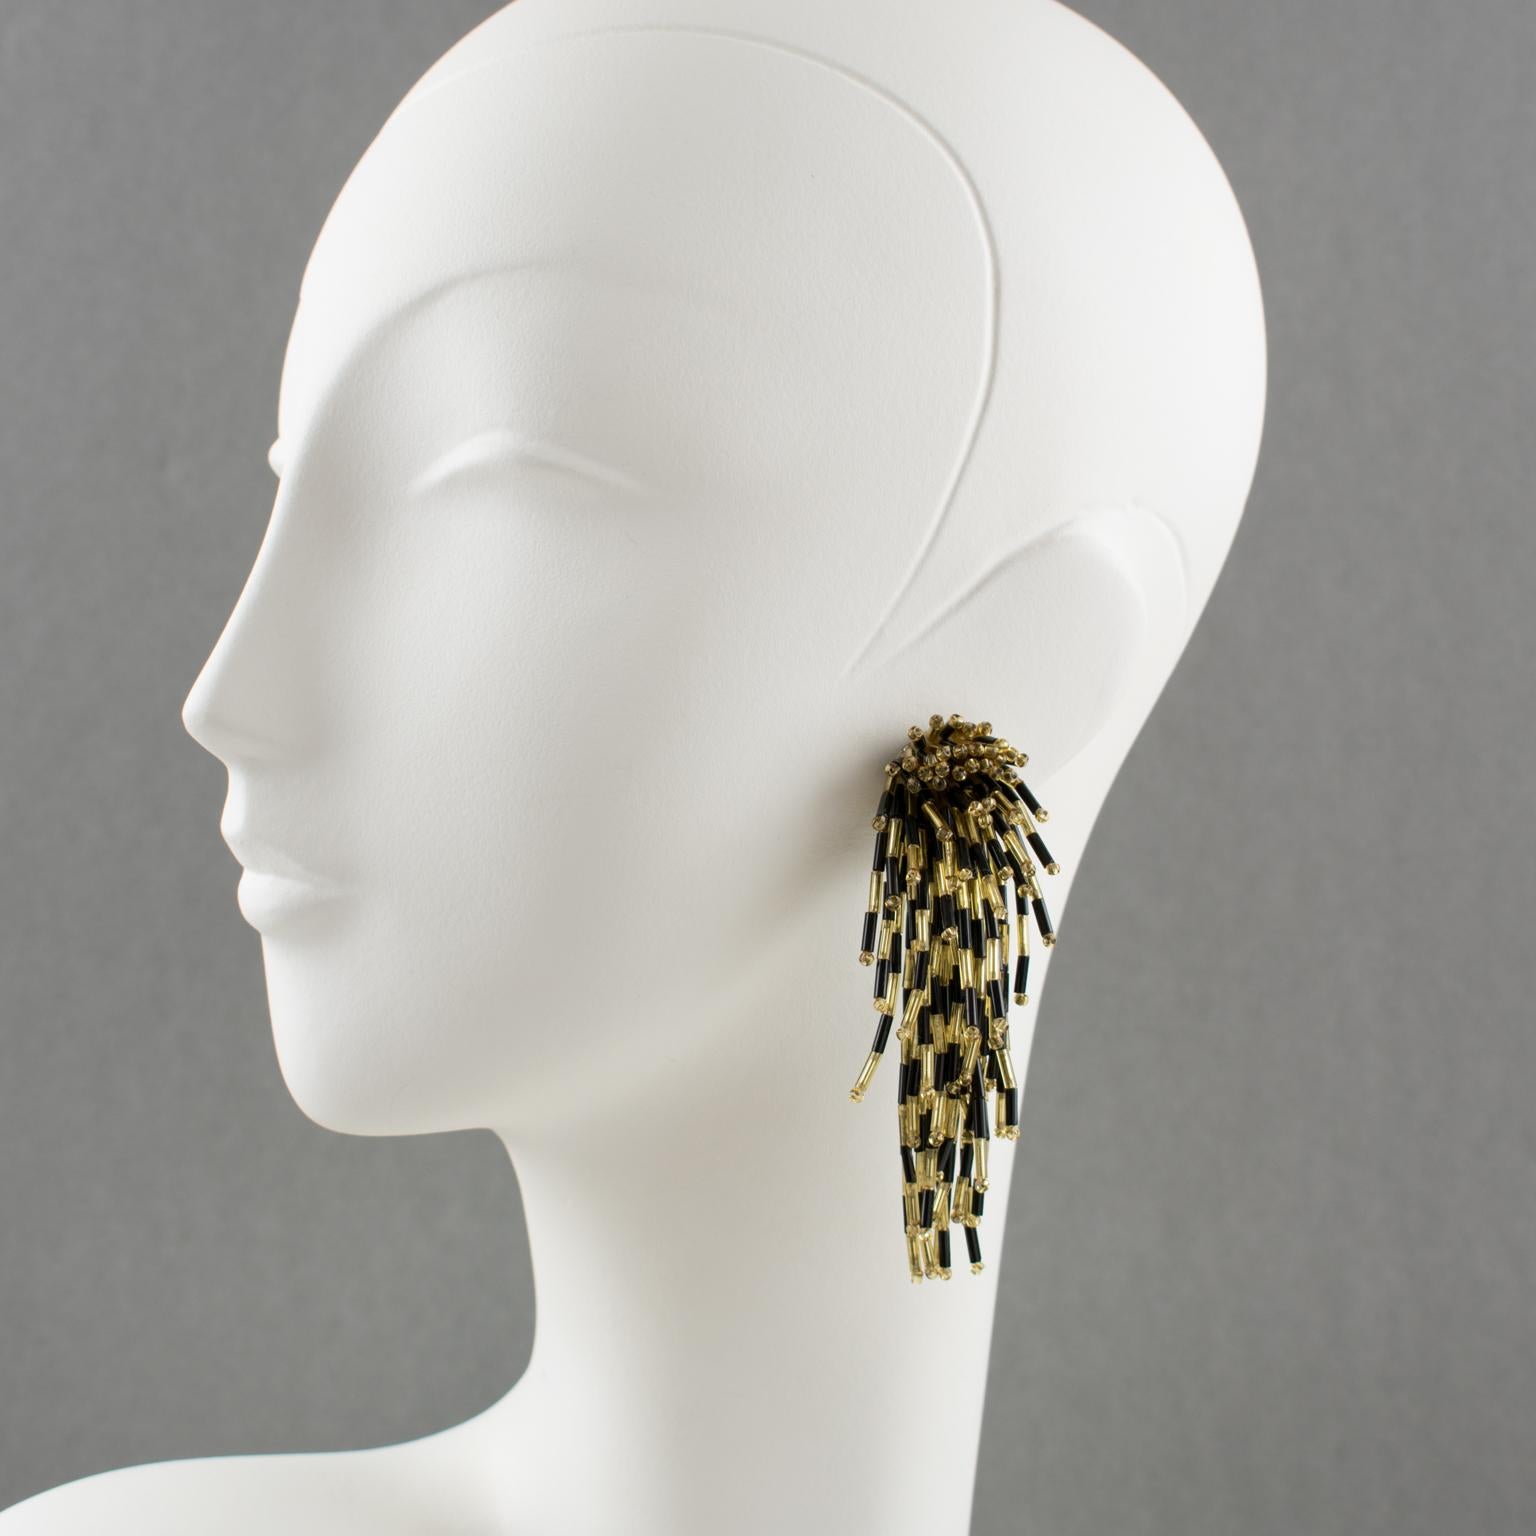 Stunning dangling glass clip-on earrings with a lionfish shape. Oversized shoulder-duster design with cascading waterfall shape built with tiny black and gold glass stick beads. There is no visible maker's mark.
Measurements: 3.57 in long (9.1 cm) x